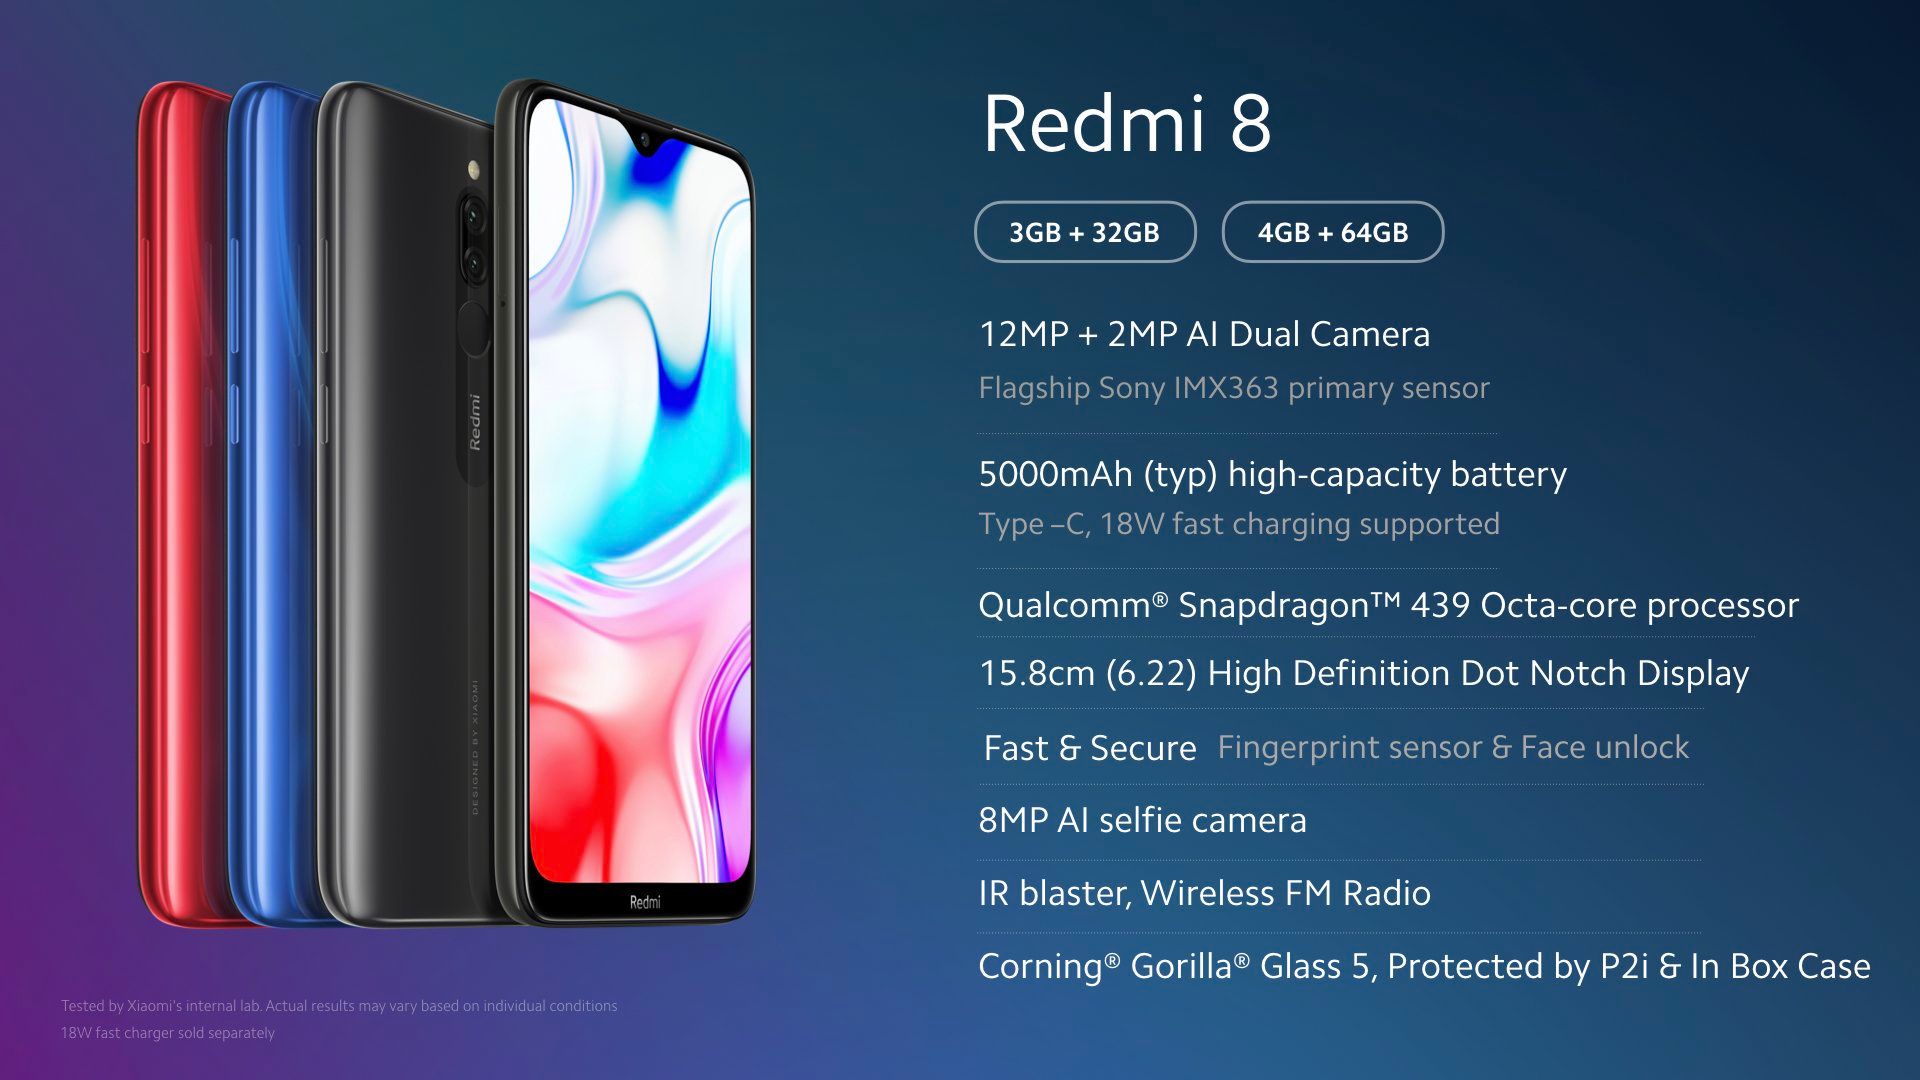 https://assets.mspimages.in/wp-content/uploads/2019/10/Redmi-8-features.jpg